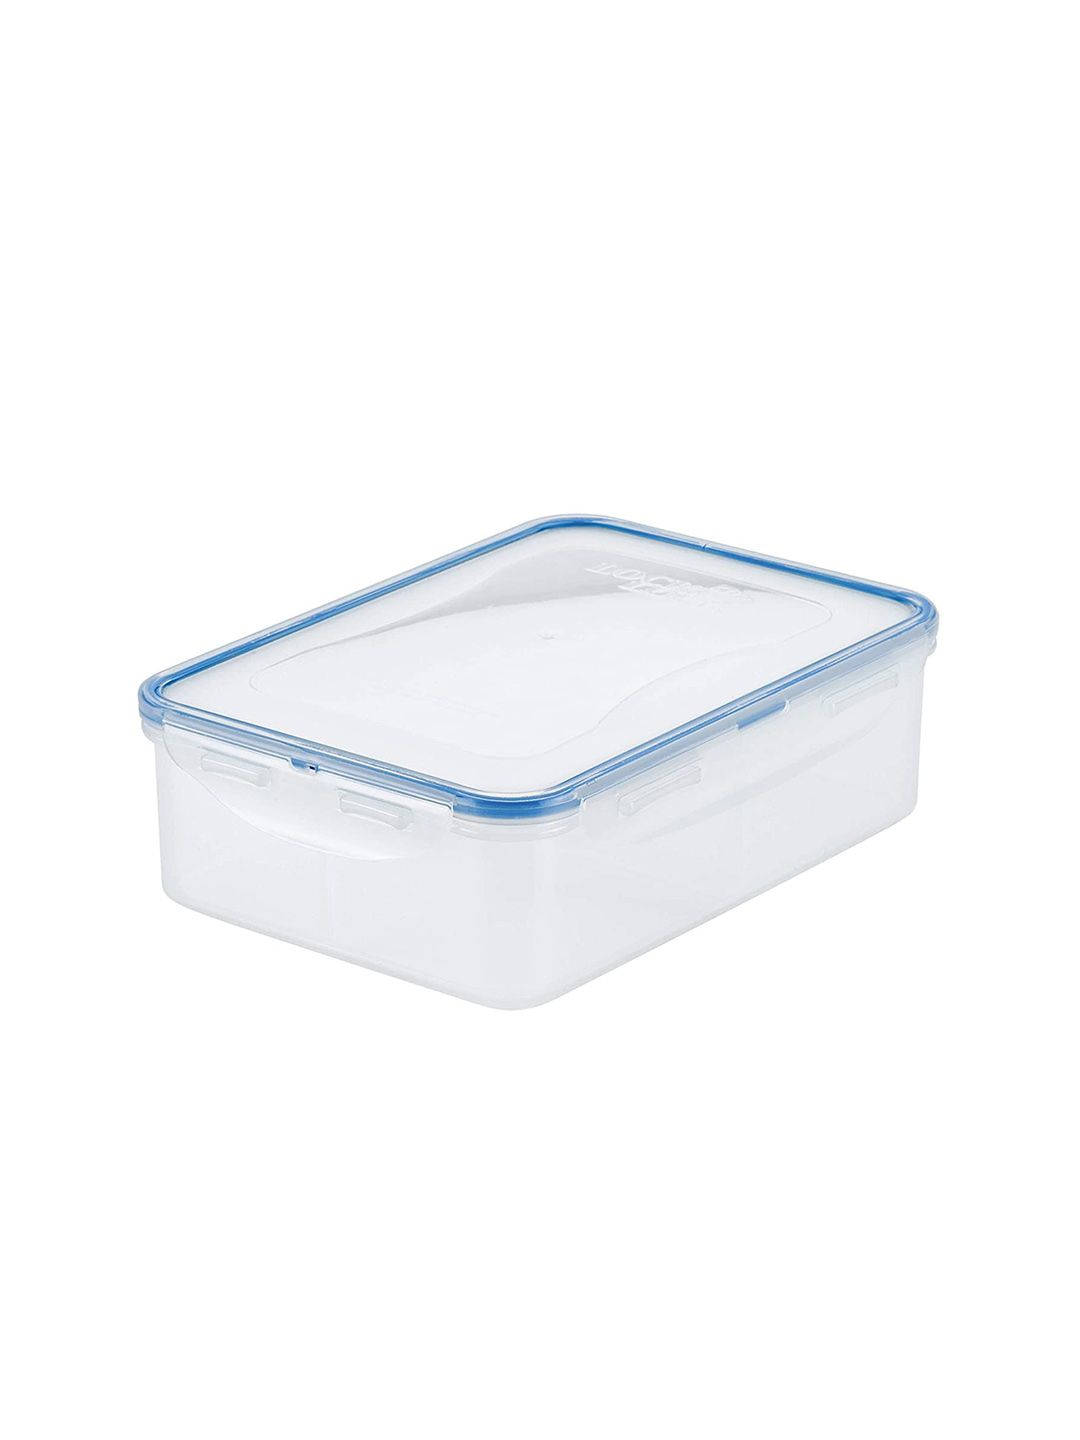 Lock & Lock Transparent & Blue Airtight Divided Food Storage Container with Leak Proof Lid Price in India